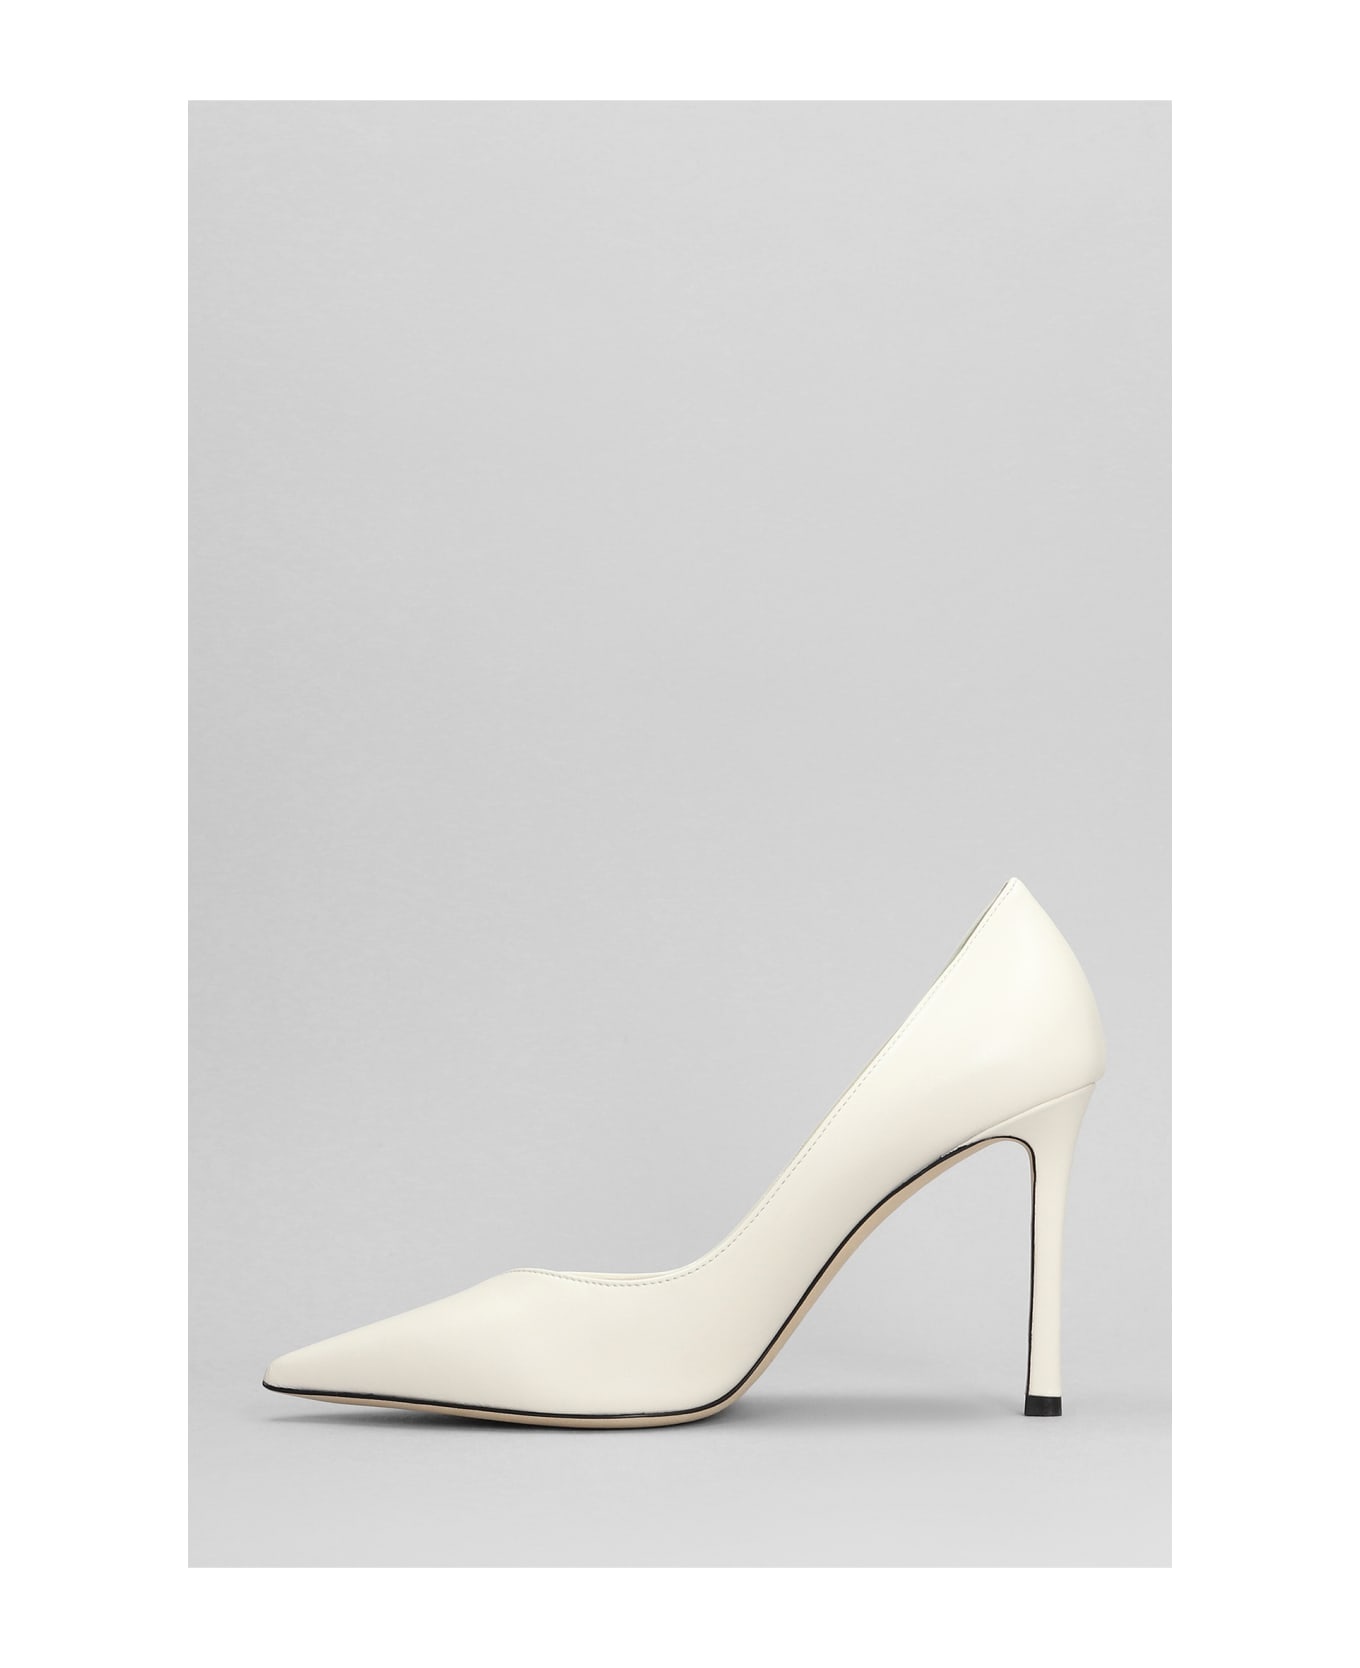 Cass 95 Pumps In Beige Patent Leather - 3